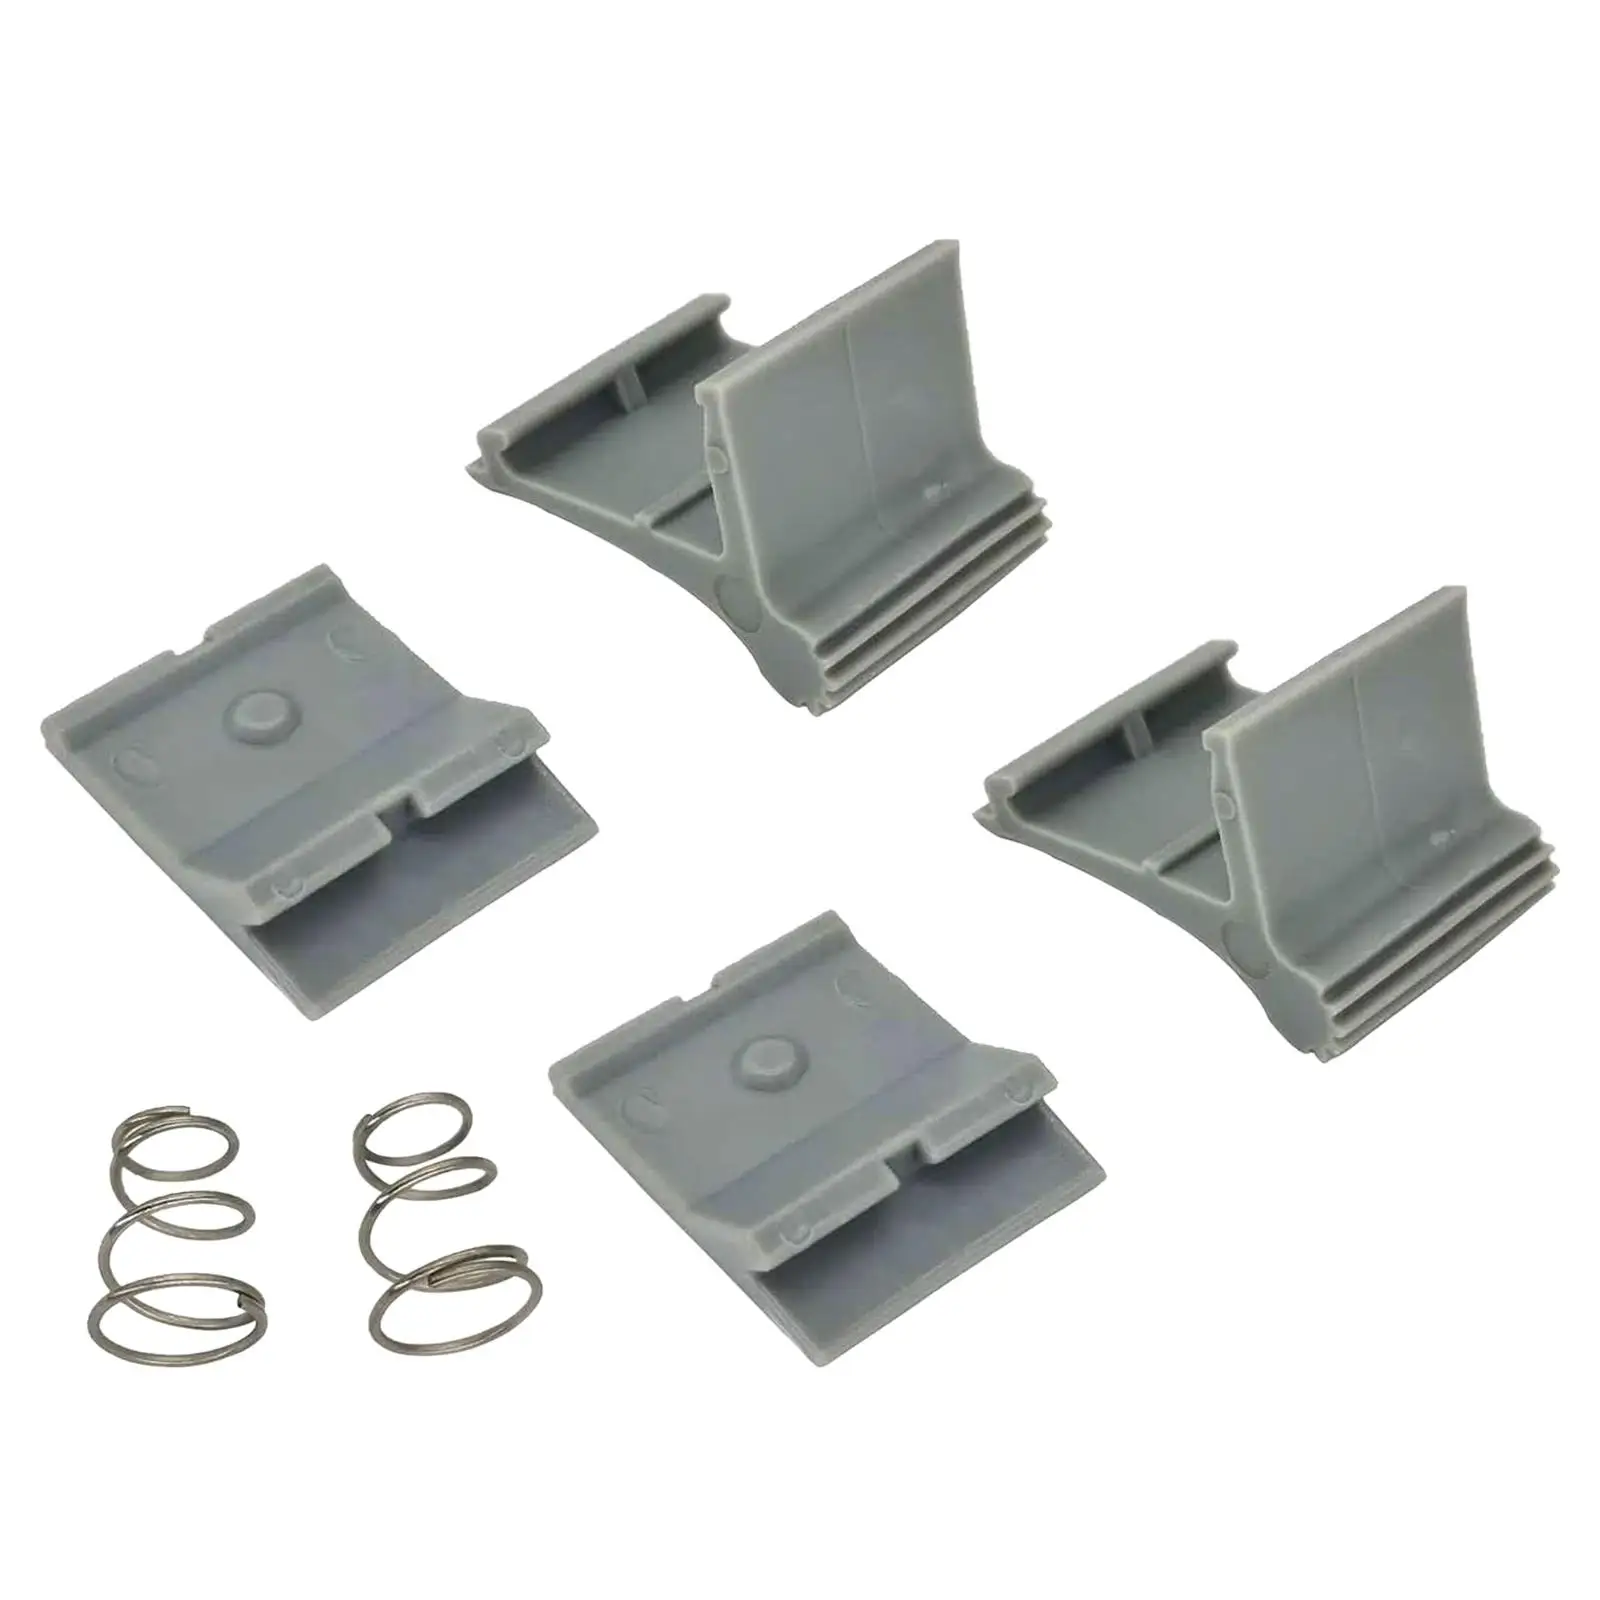 Awning Arm Slider Catch Set Repair Parts Spare Parts 4 Slider Catch Easy to Install Replaces for RV Motorhome